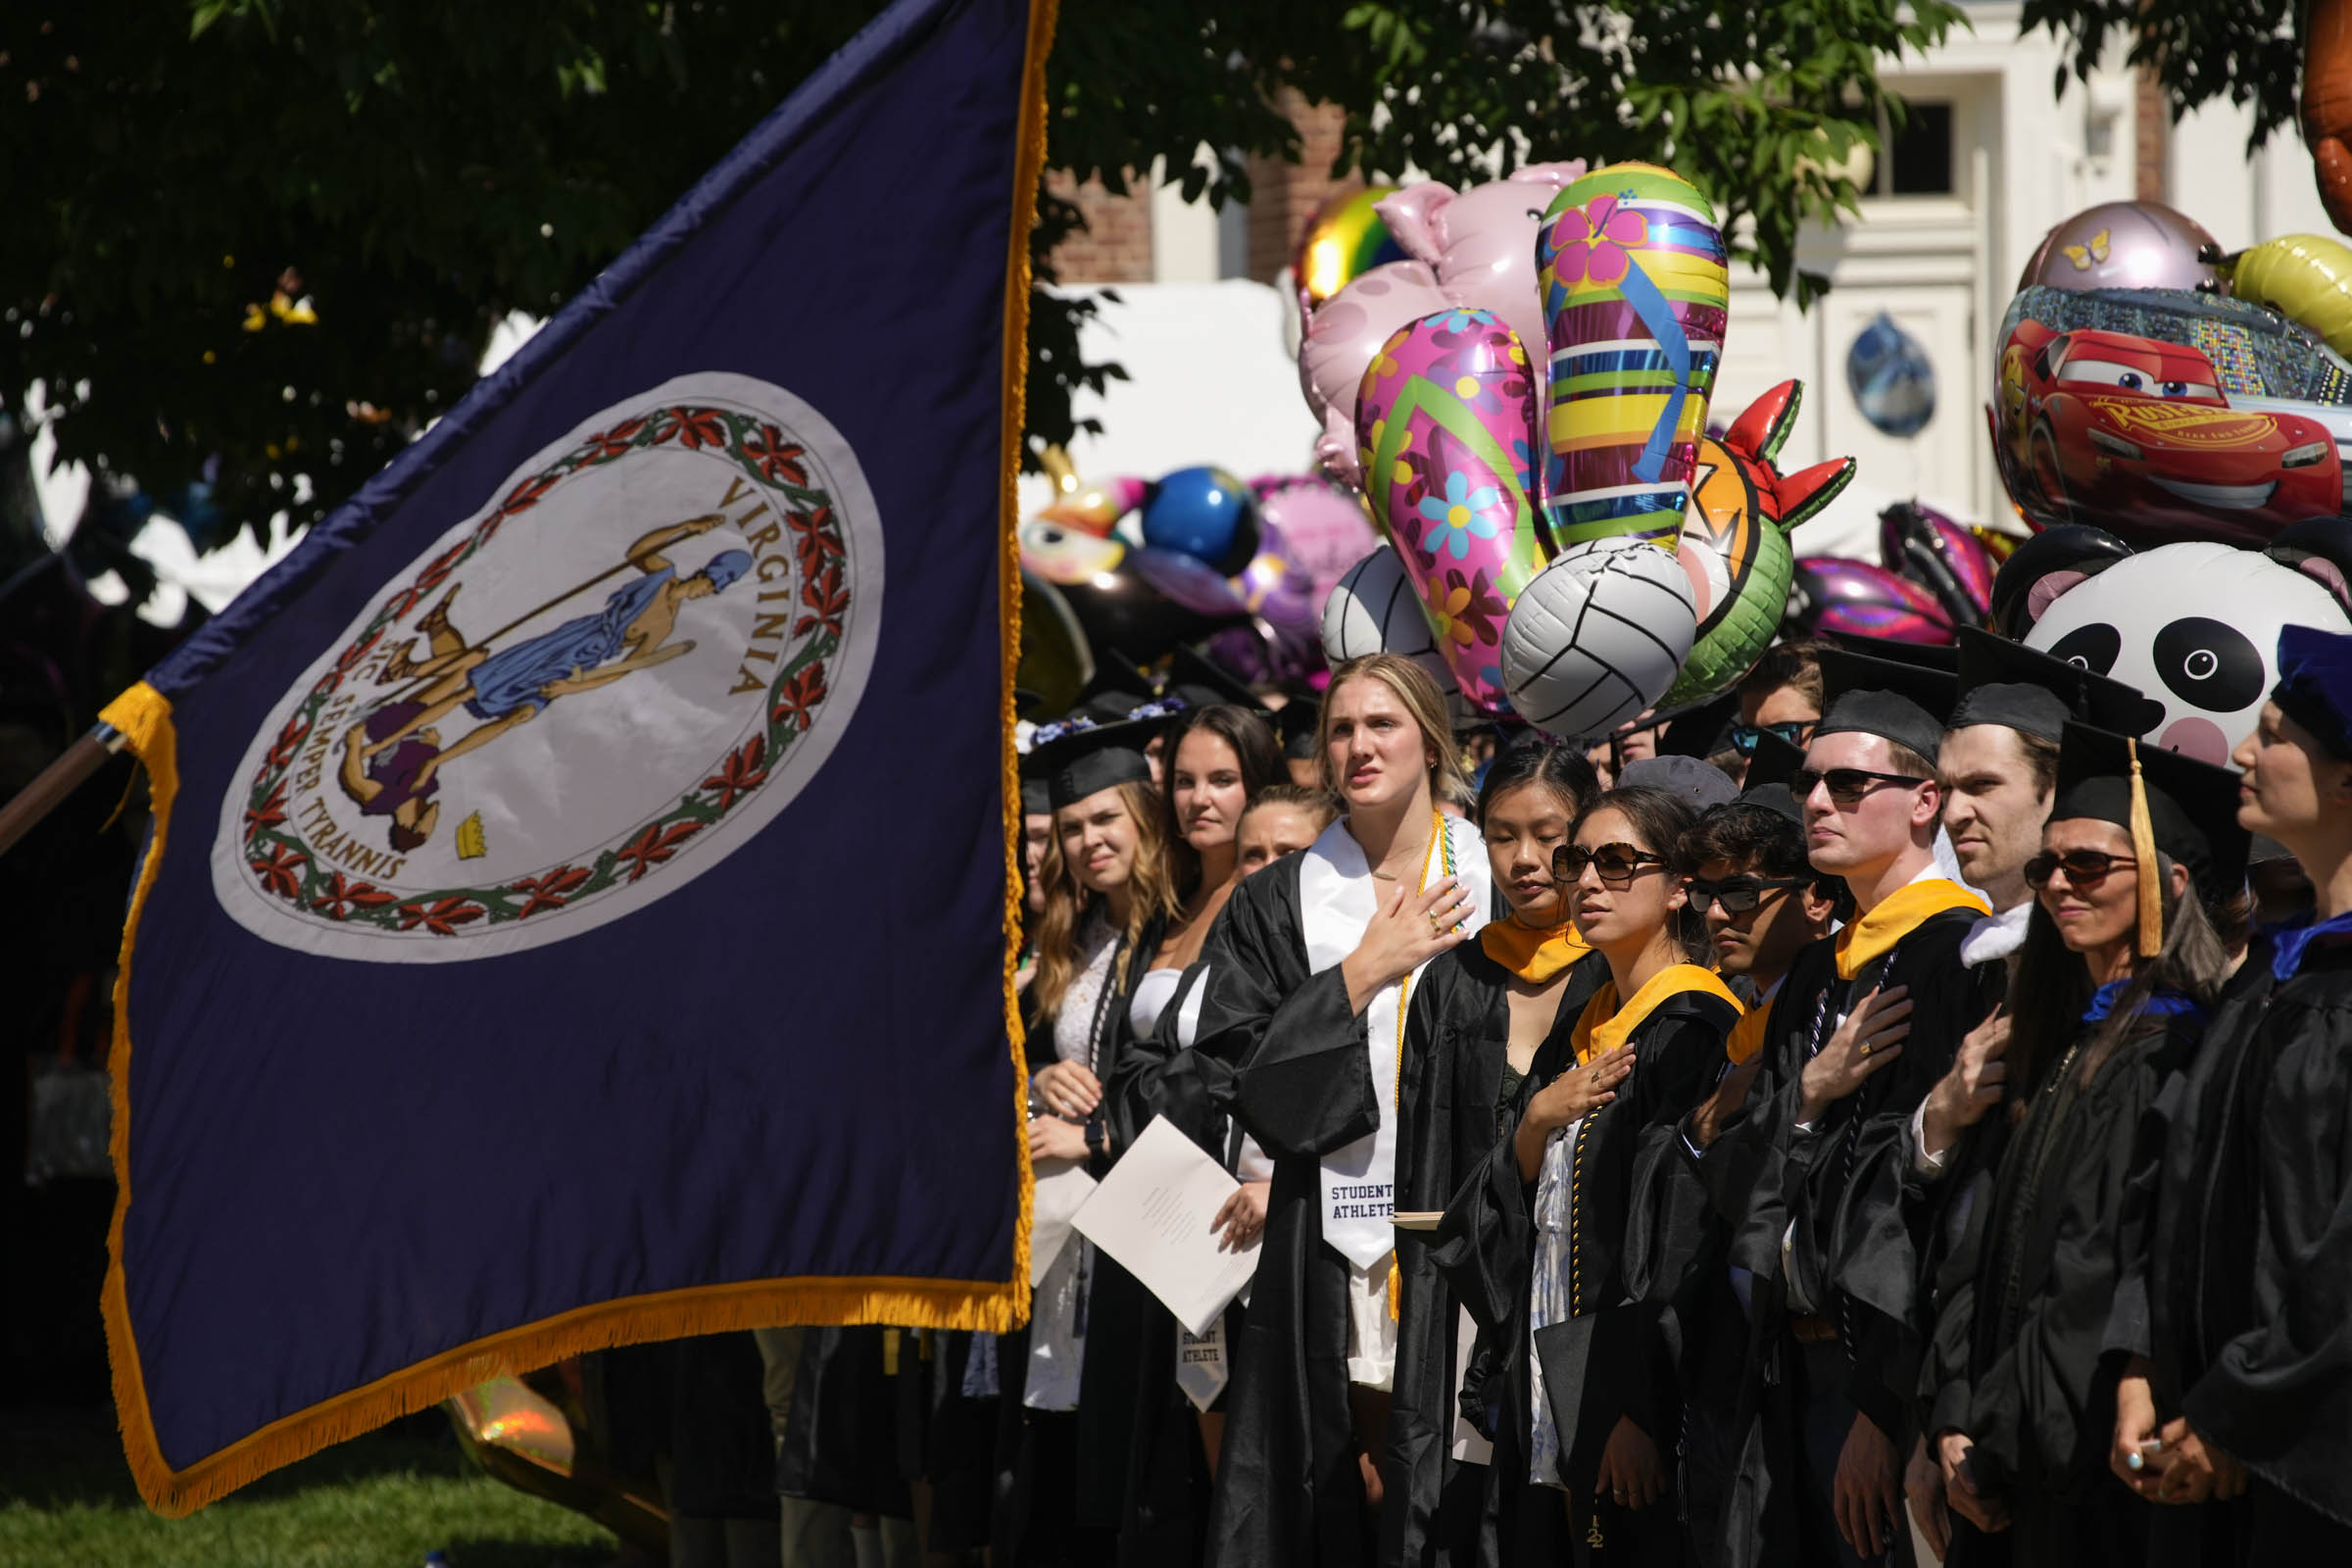 A row of graduating students with their hands on their hearts is visible behind the Virginia flag